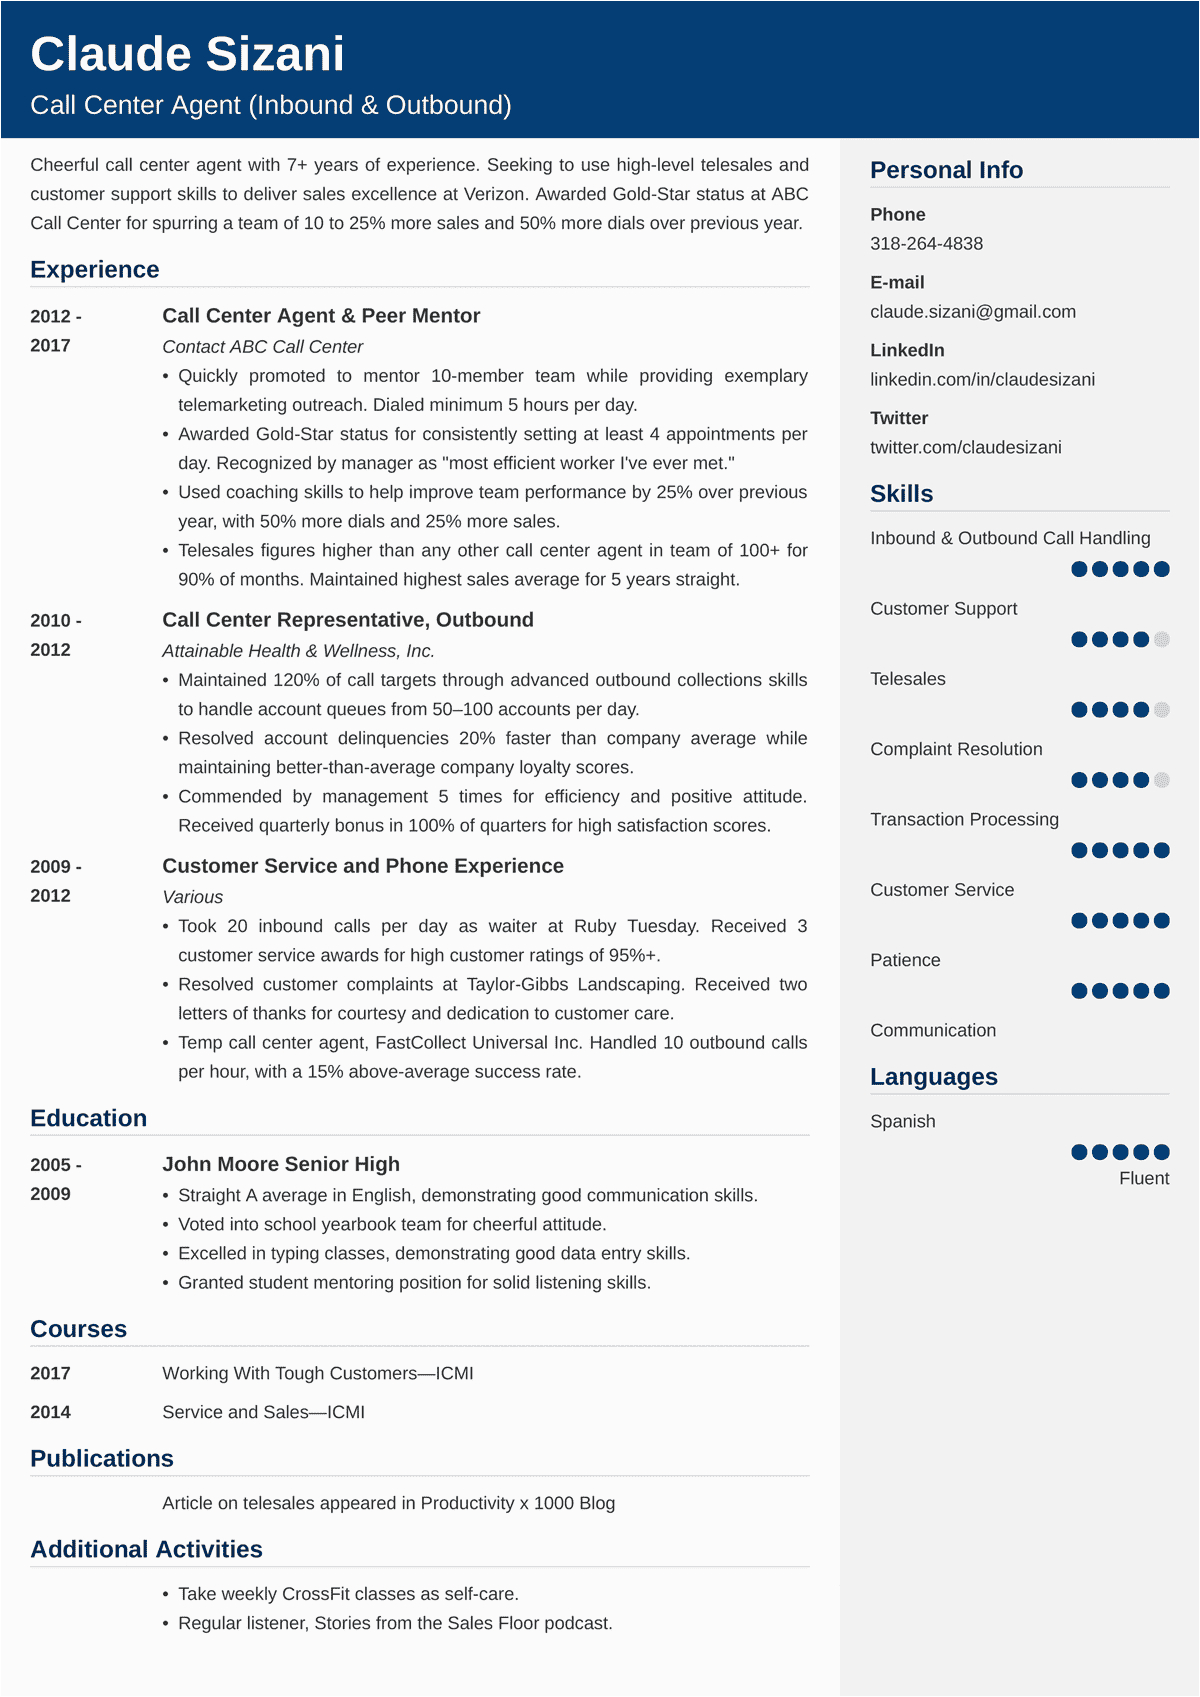 Call Center Resume Examples and Samples Call Center Resume Sample—25 Examples and Writing Tips